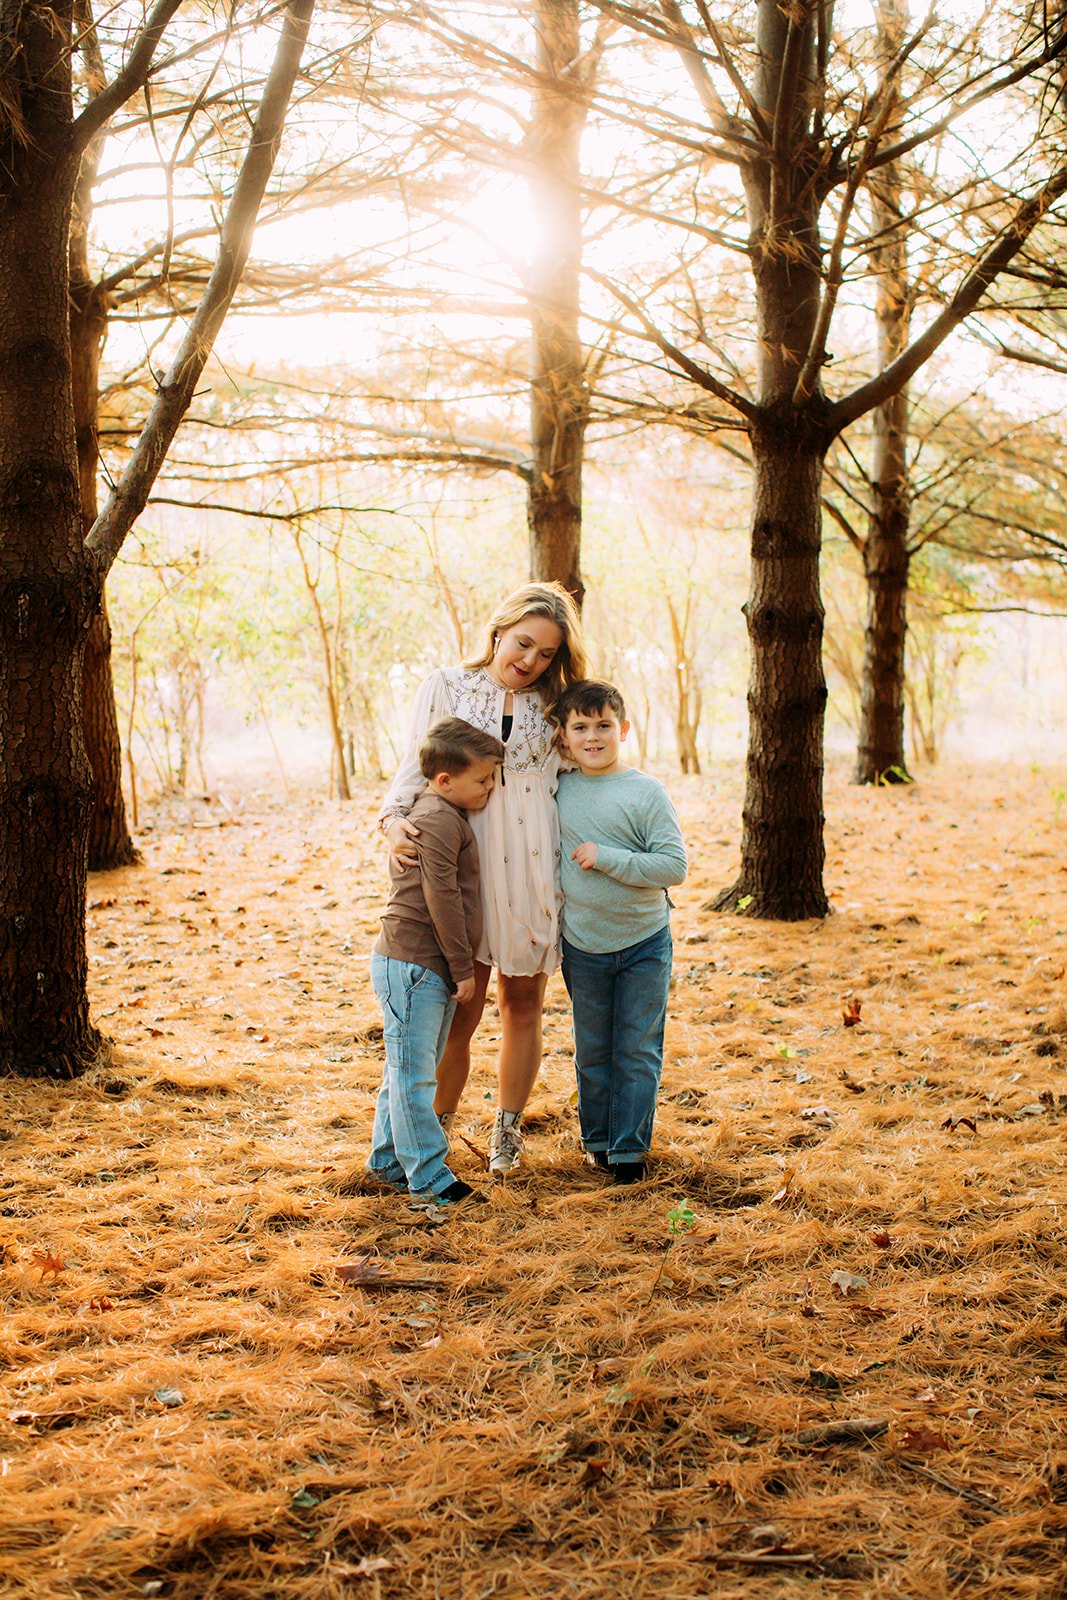  In a forest with warm sunlight and a mossy floor, a mother hugs her two boys by Teala Ward Photography.  mossy forest floor #TealaWardPhotography #TealaWardFamilies #holidayfamilypics #photography #Illinoisfamilyphotography #familysession 